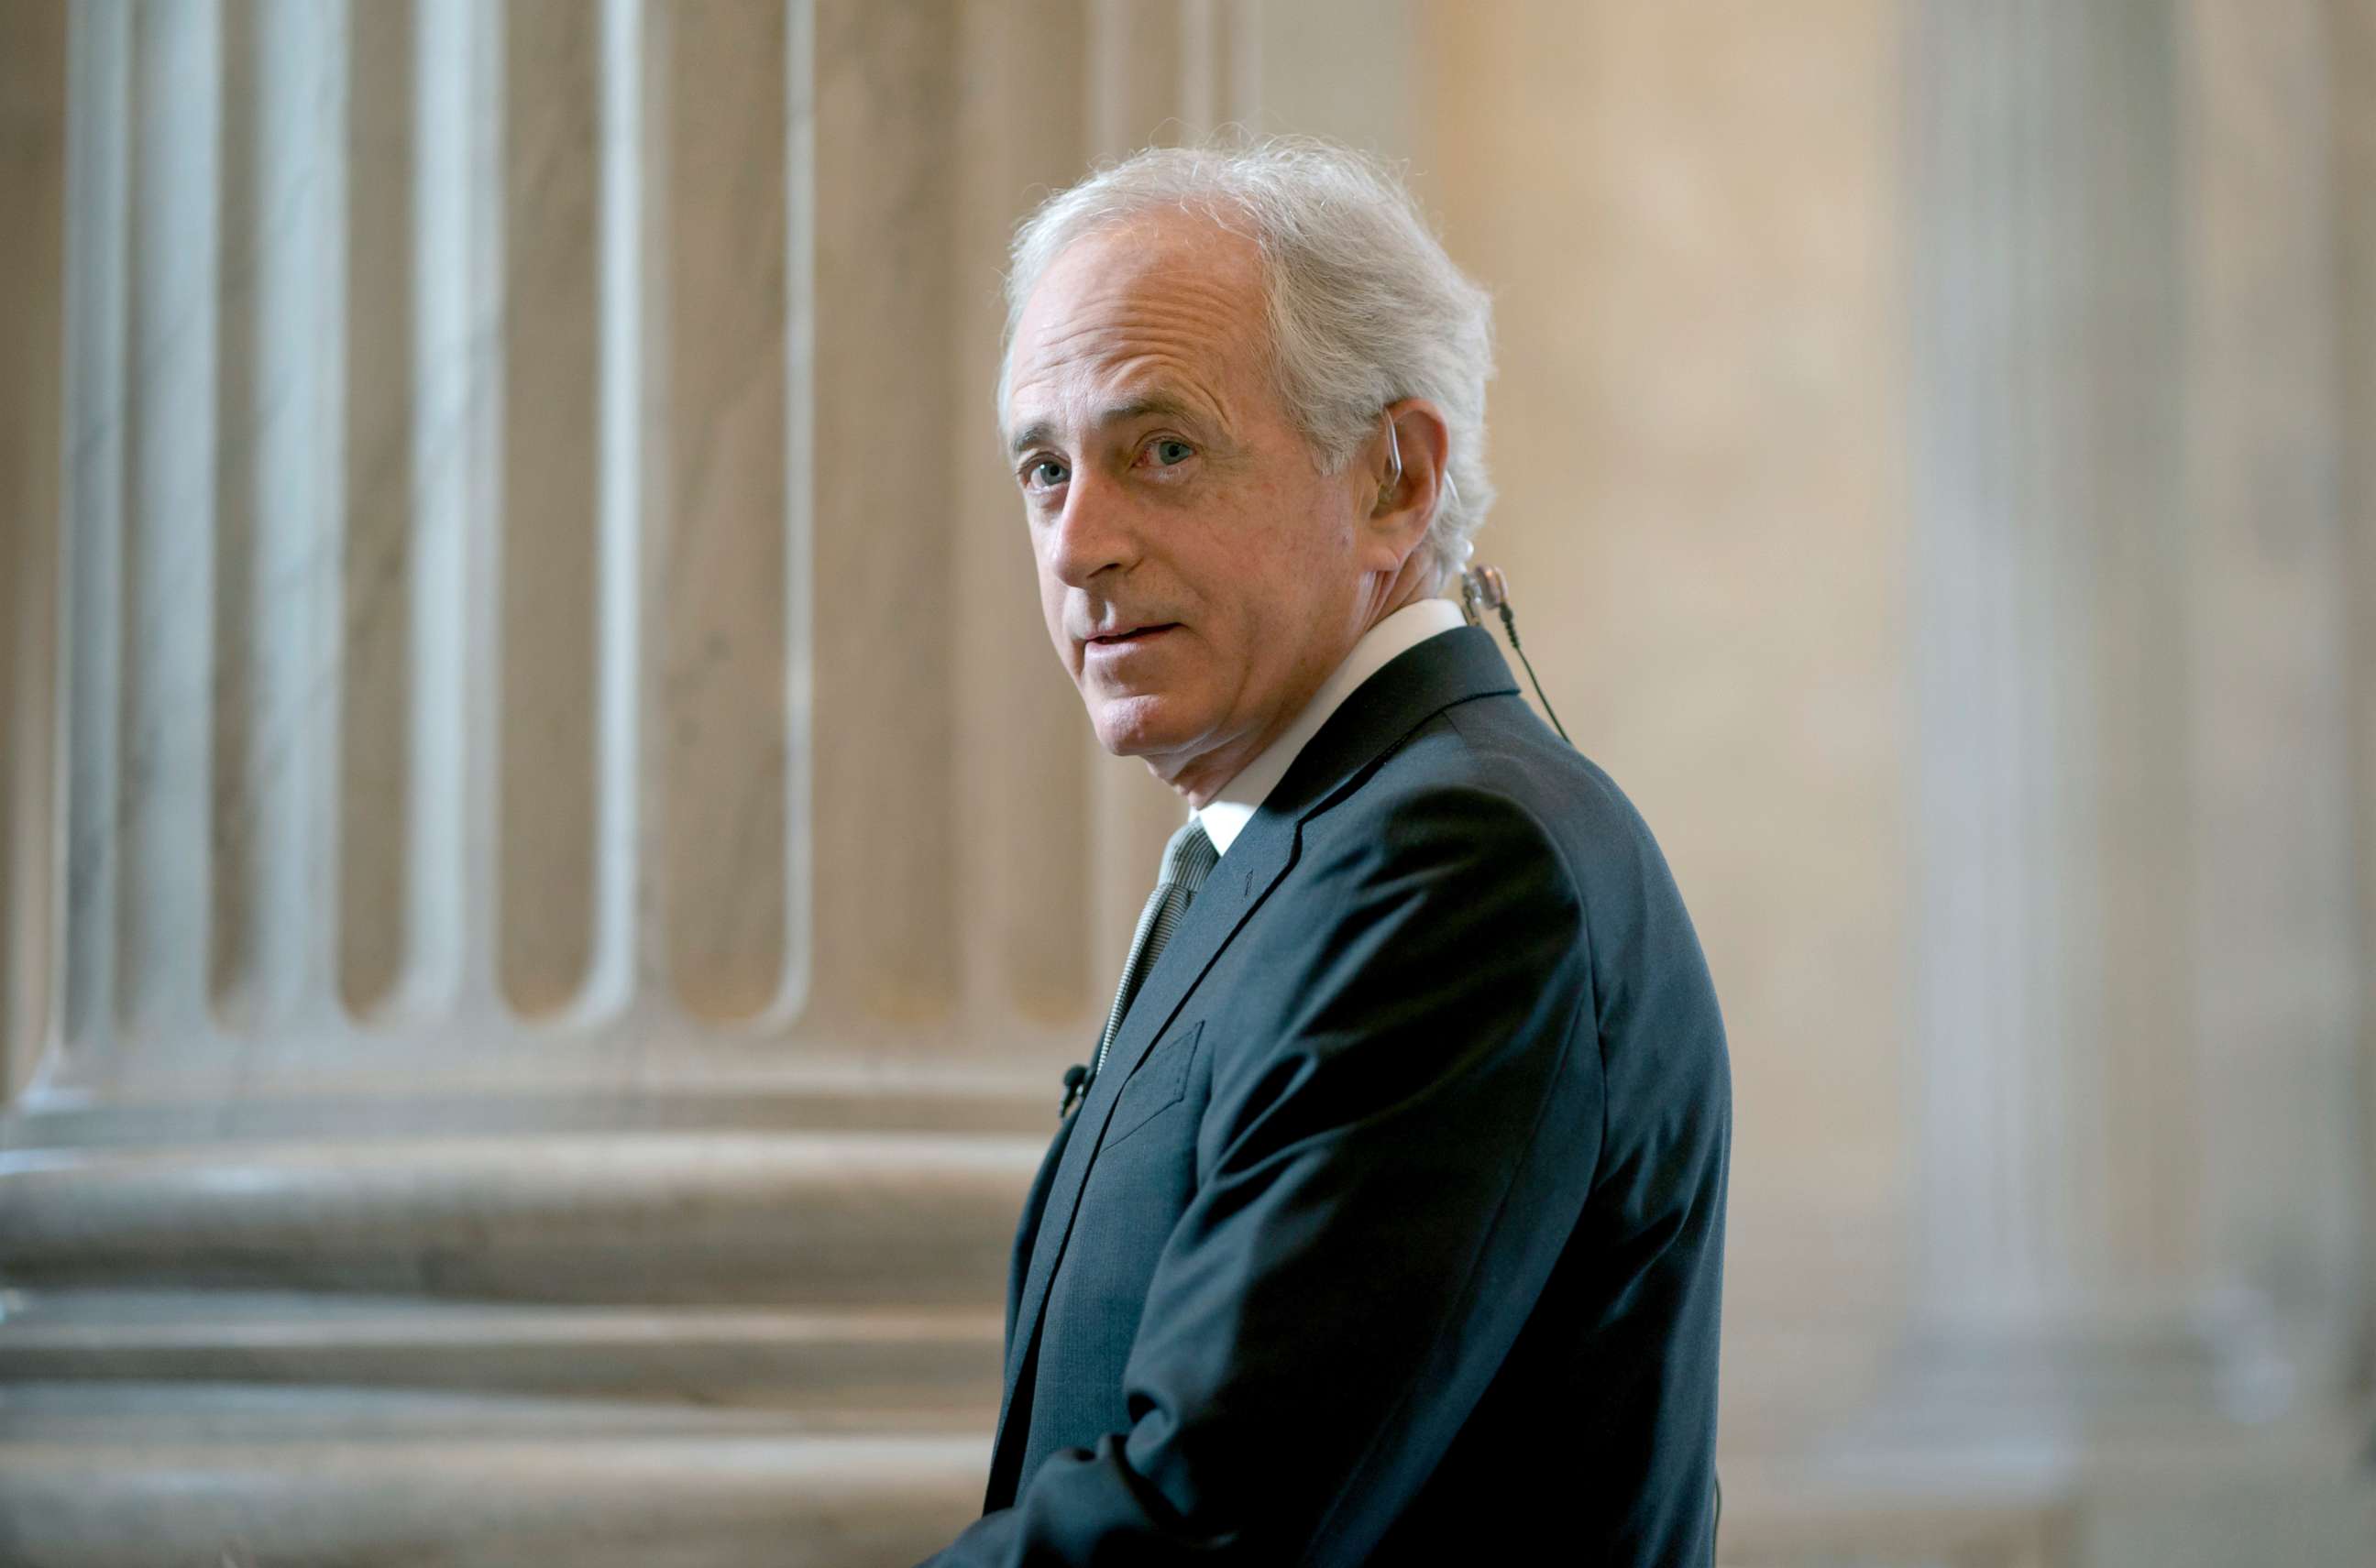 PHOTO: Senate Foreign Relations Committee Chairman Bob Corker, R-Tenn., takes questions during a TV news interview on Capitol Hill, April 19, 2018.